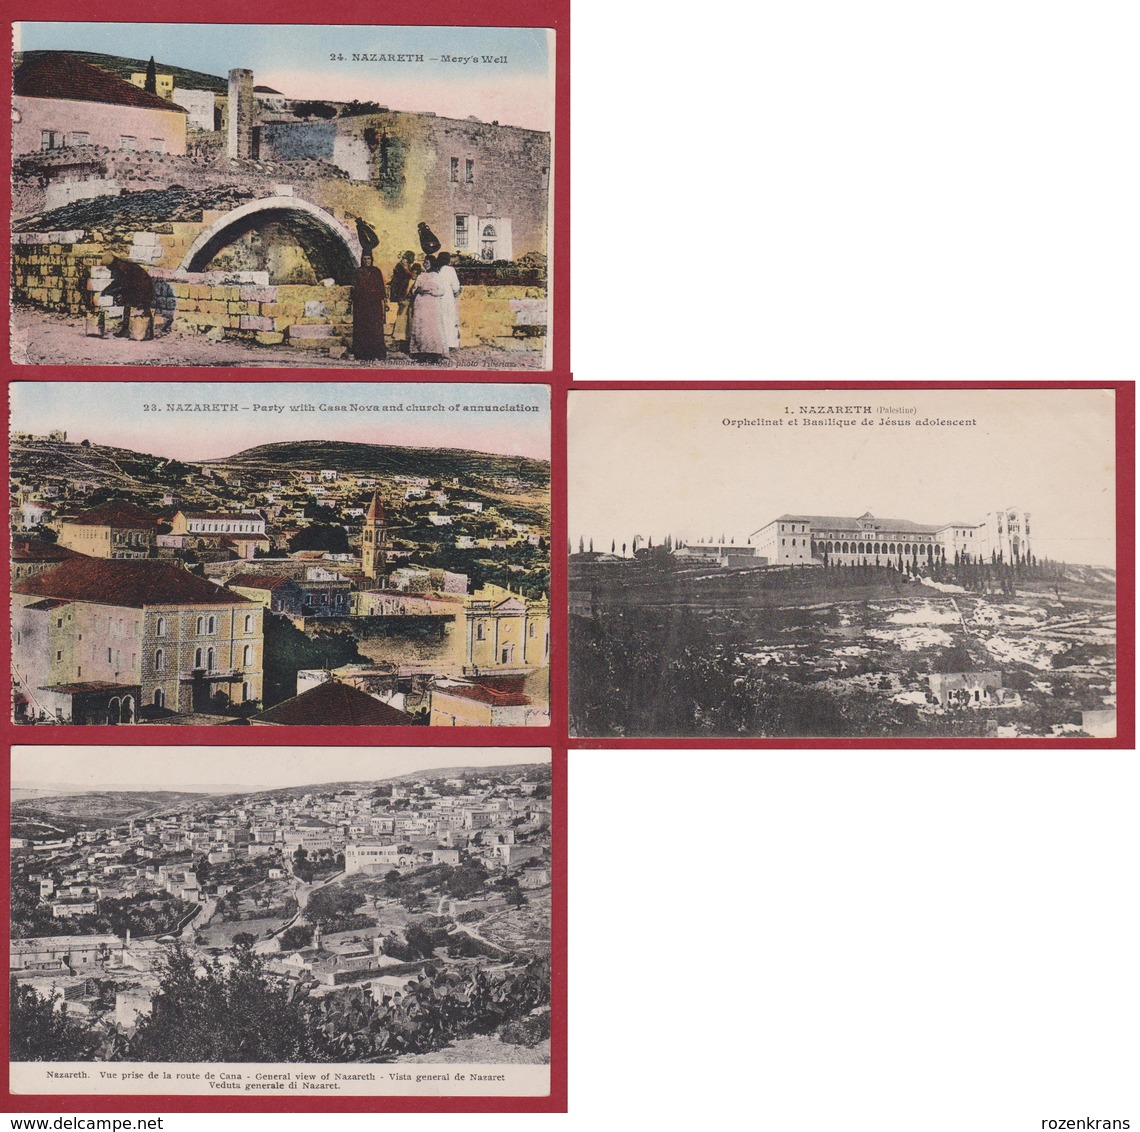 Lot Of 4 Old Postcards Israel Judaism Holy Land City Nazareth Church Of Annunciation Basilique De Jesus Mery's Well - Israel